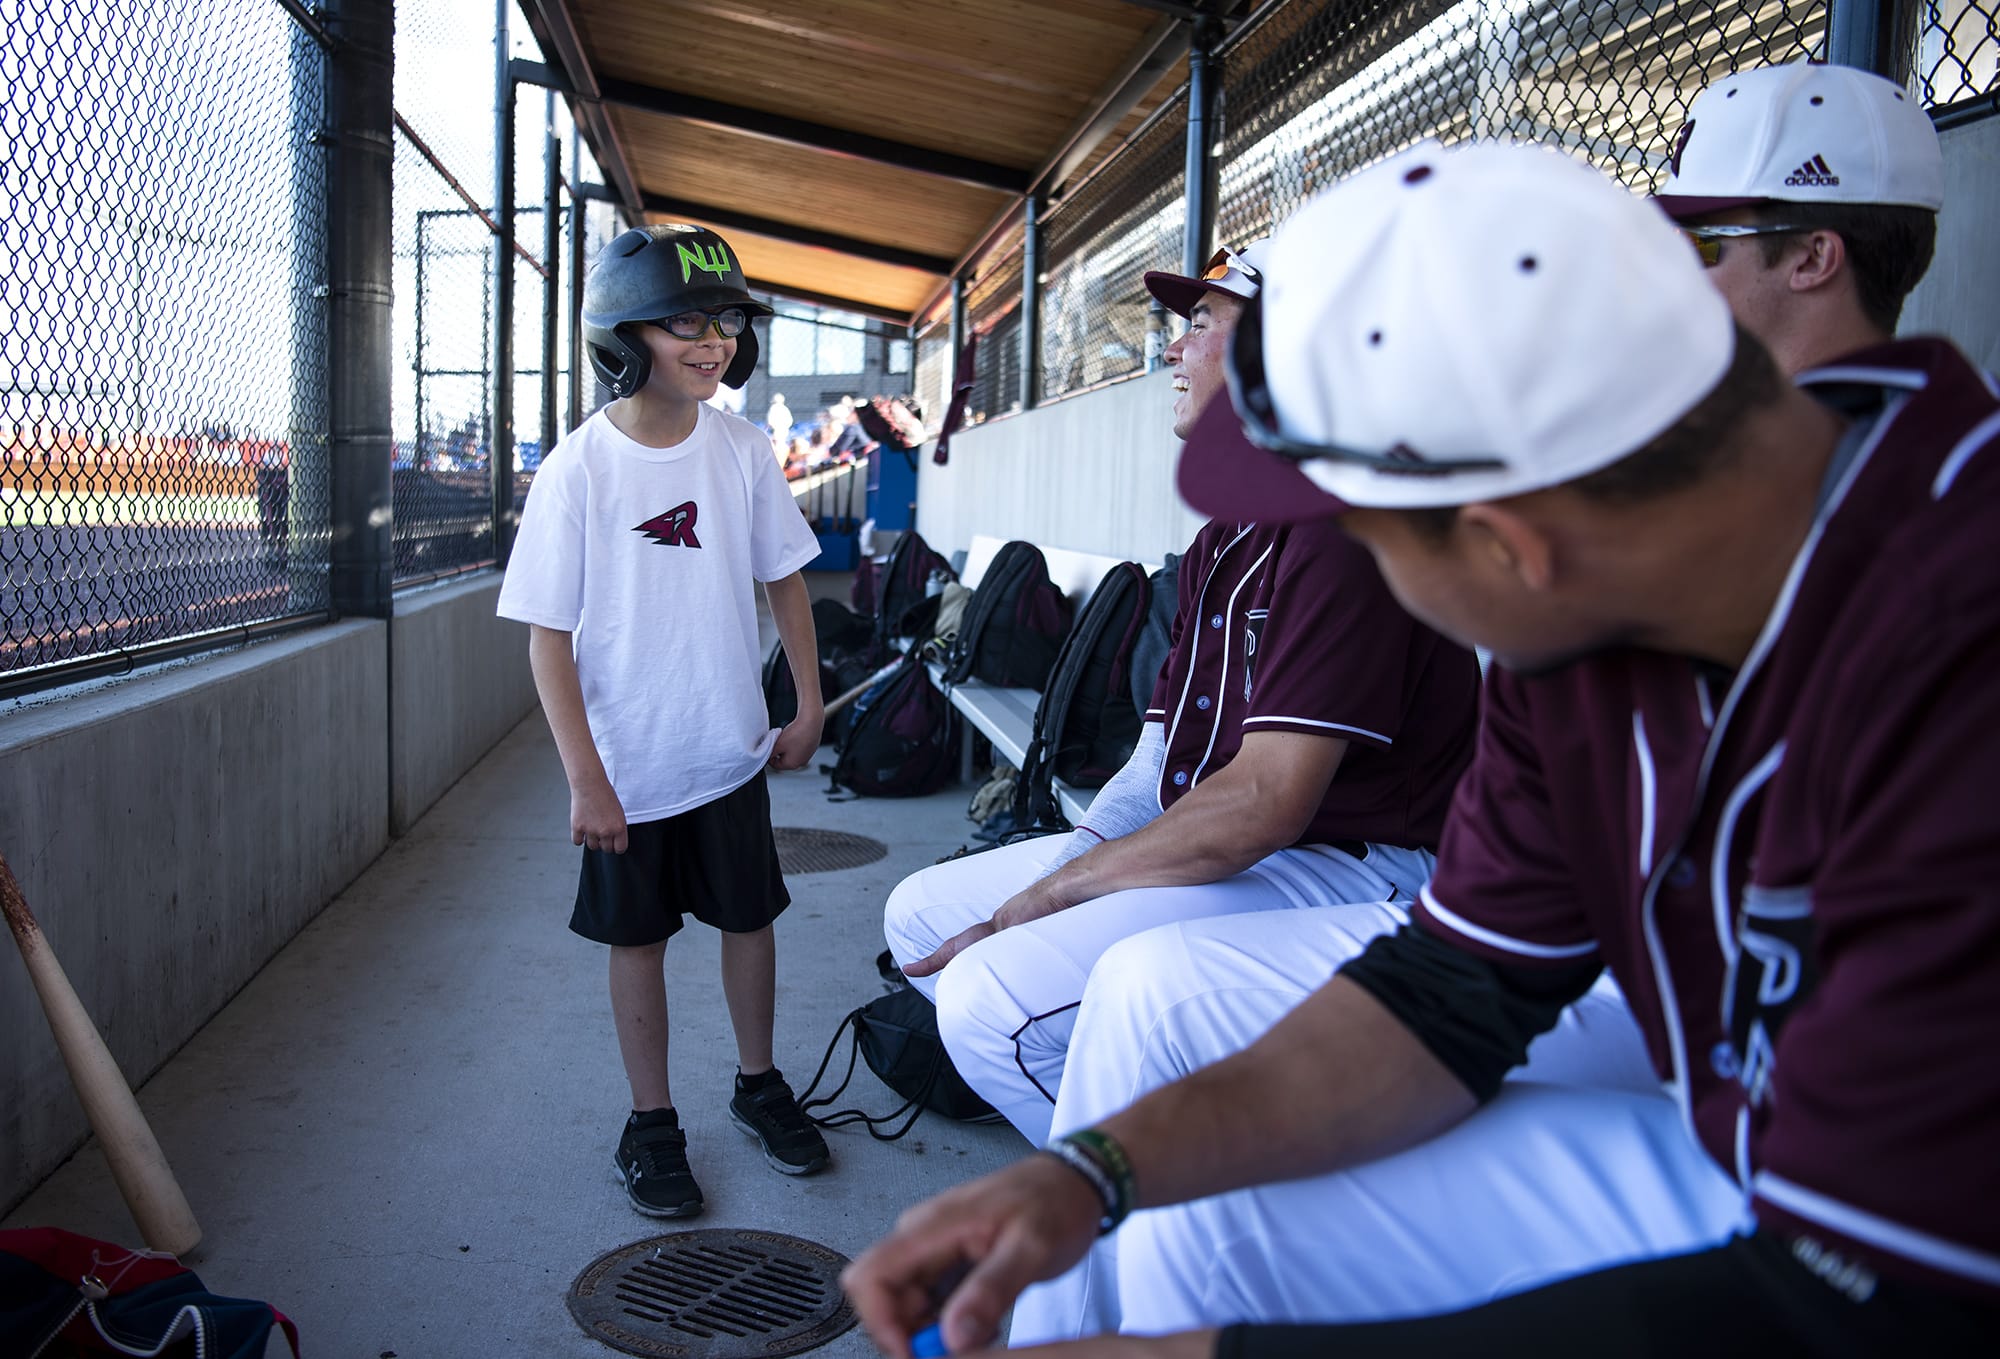 Aidan Deeney of Vancouver, 11, chats with the Raptors players before the game against the Cowlitz Black Bears at the Ridgefield Outdoor Recreation Complex on Friday night, July 12, 2019. Two local kids get to help out the team each game by retrieving balls and bats from the field.